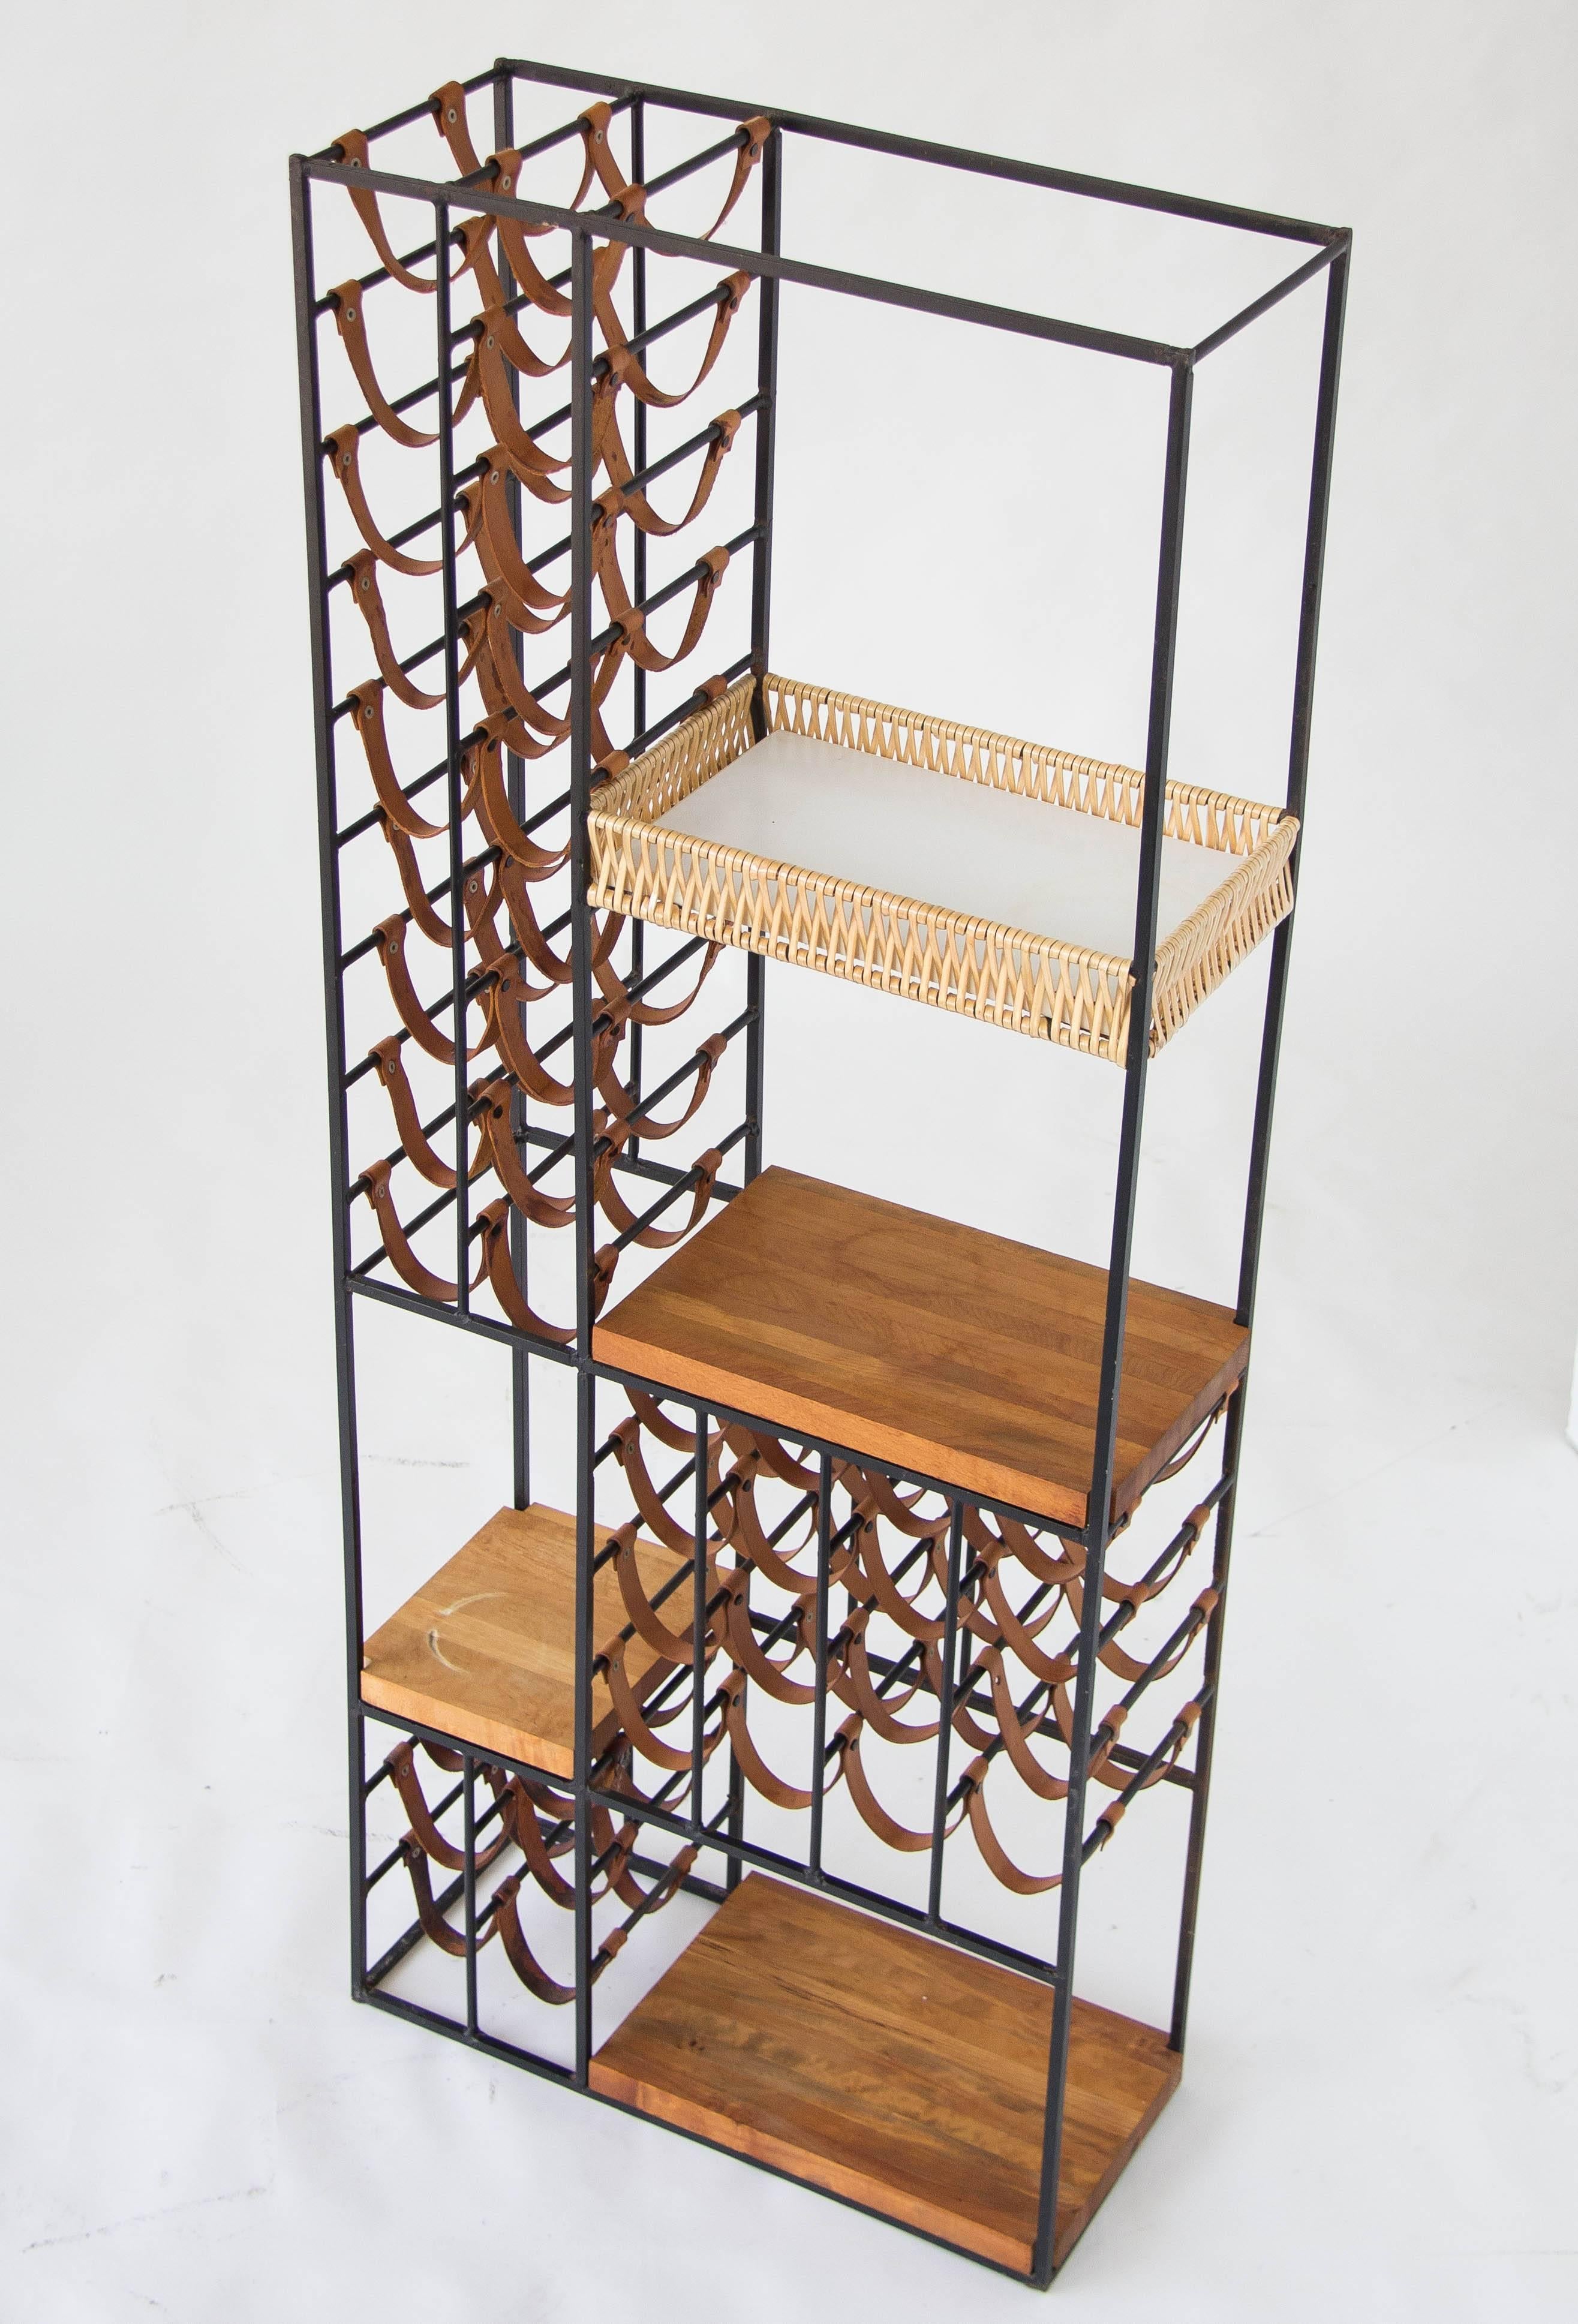 A 40-bottle wine rack designed by Arthur Umanoff and produced by Shaver Howard. The unique design has an iron frame with rows of leather slings for holding wine bottles, interspersed with three butcher-block shelves of solid wood, and one wicker